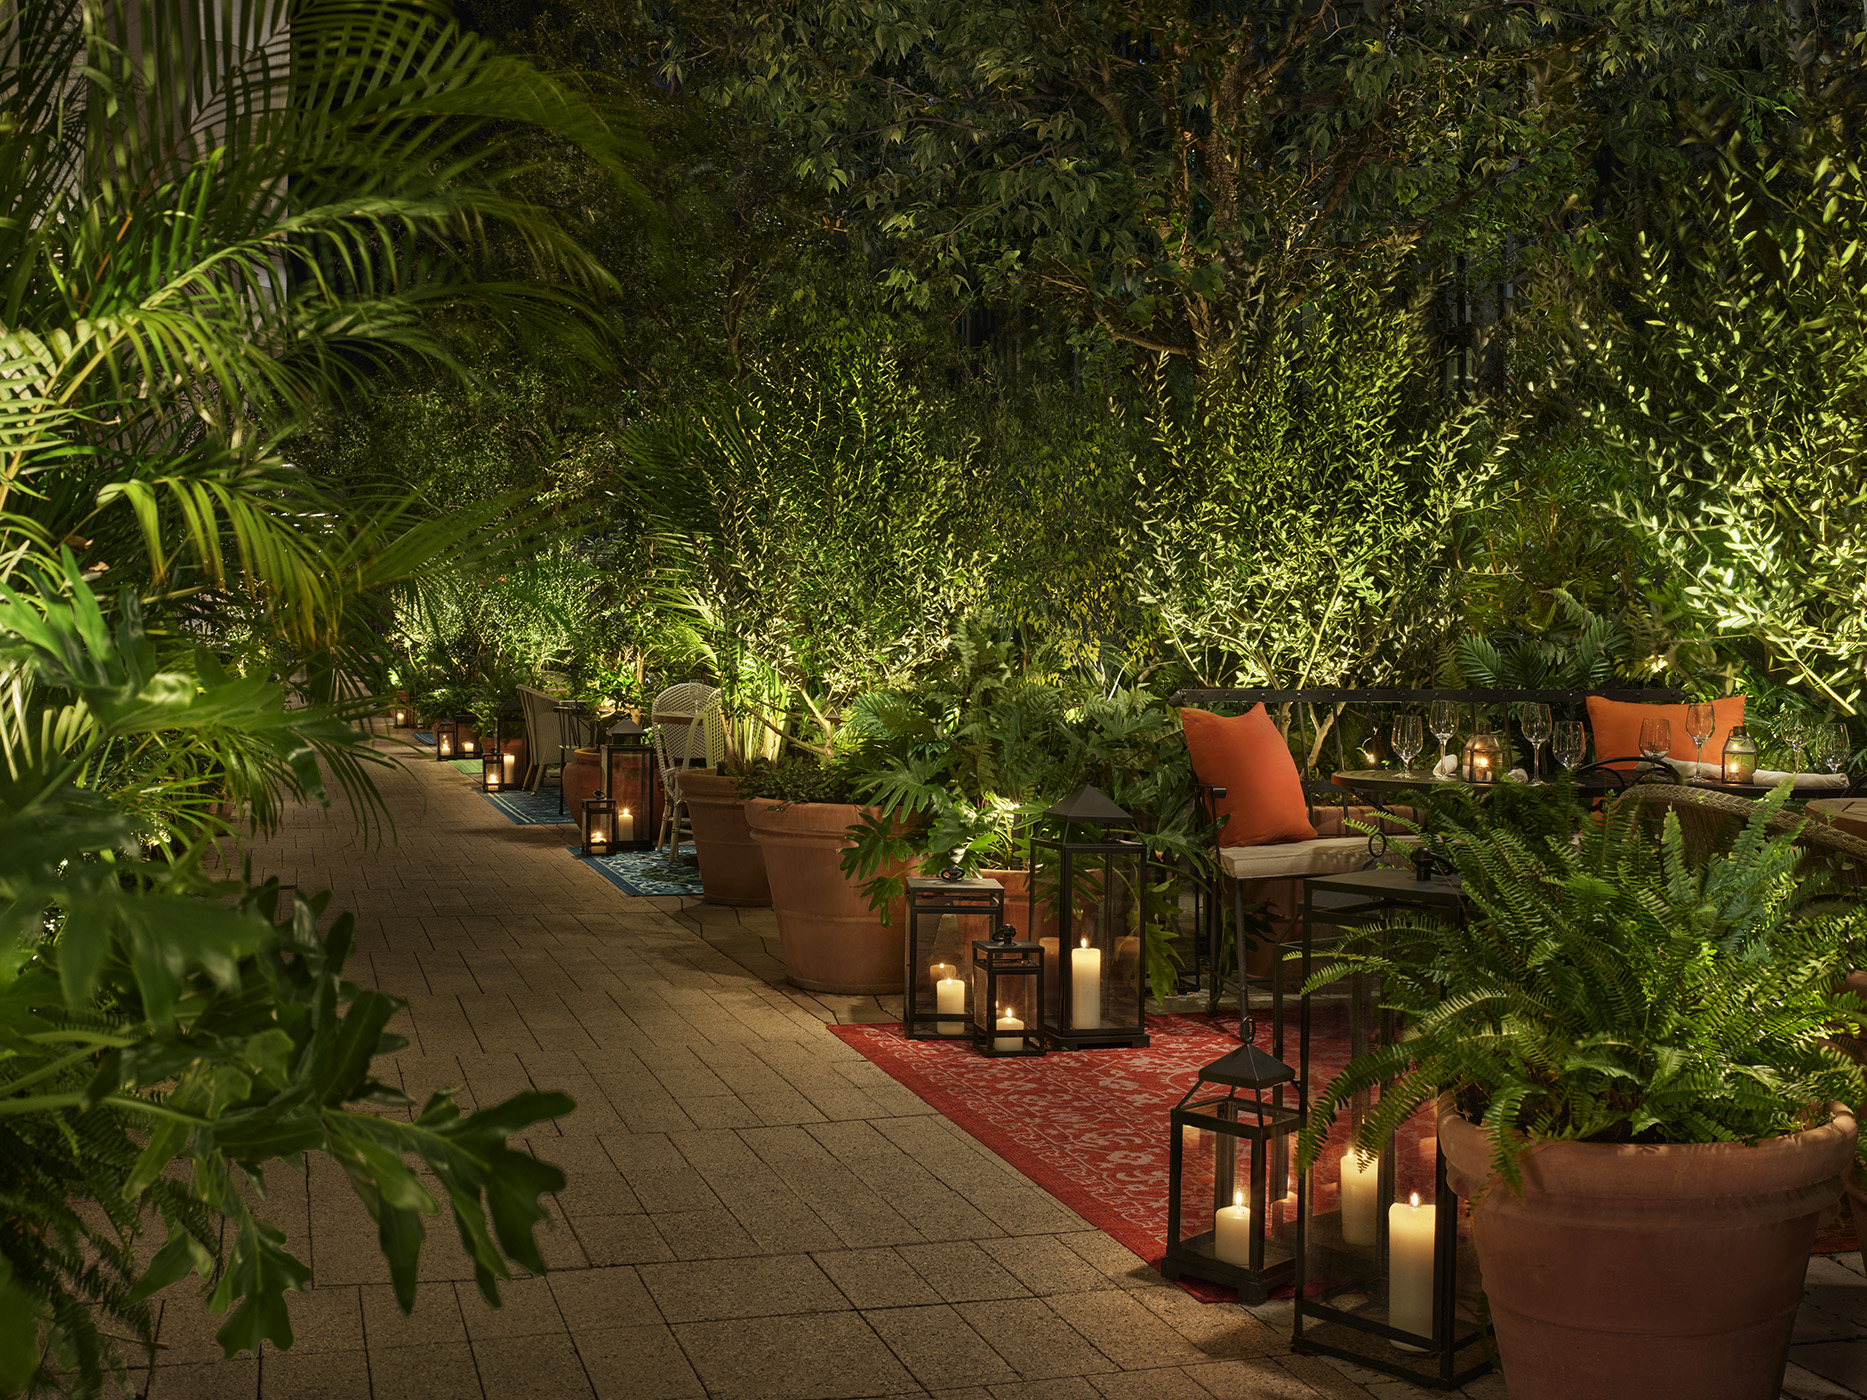 Semi-private outdoor seating with tropical flora and candles for ambiance